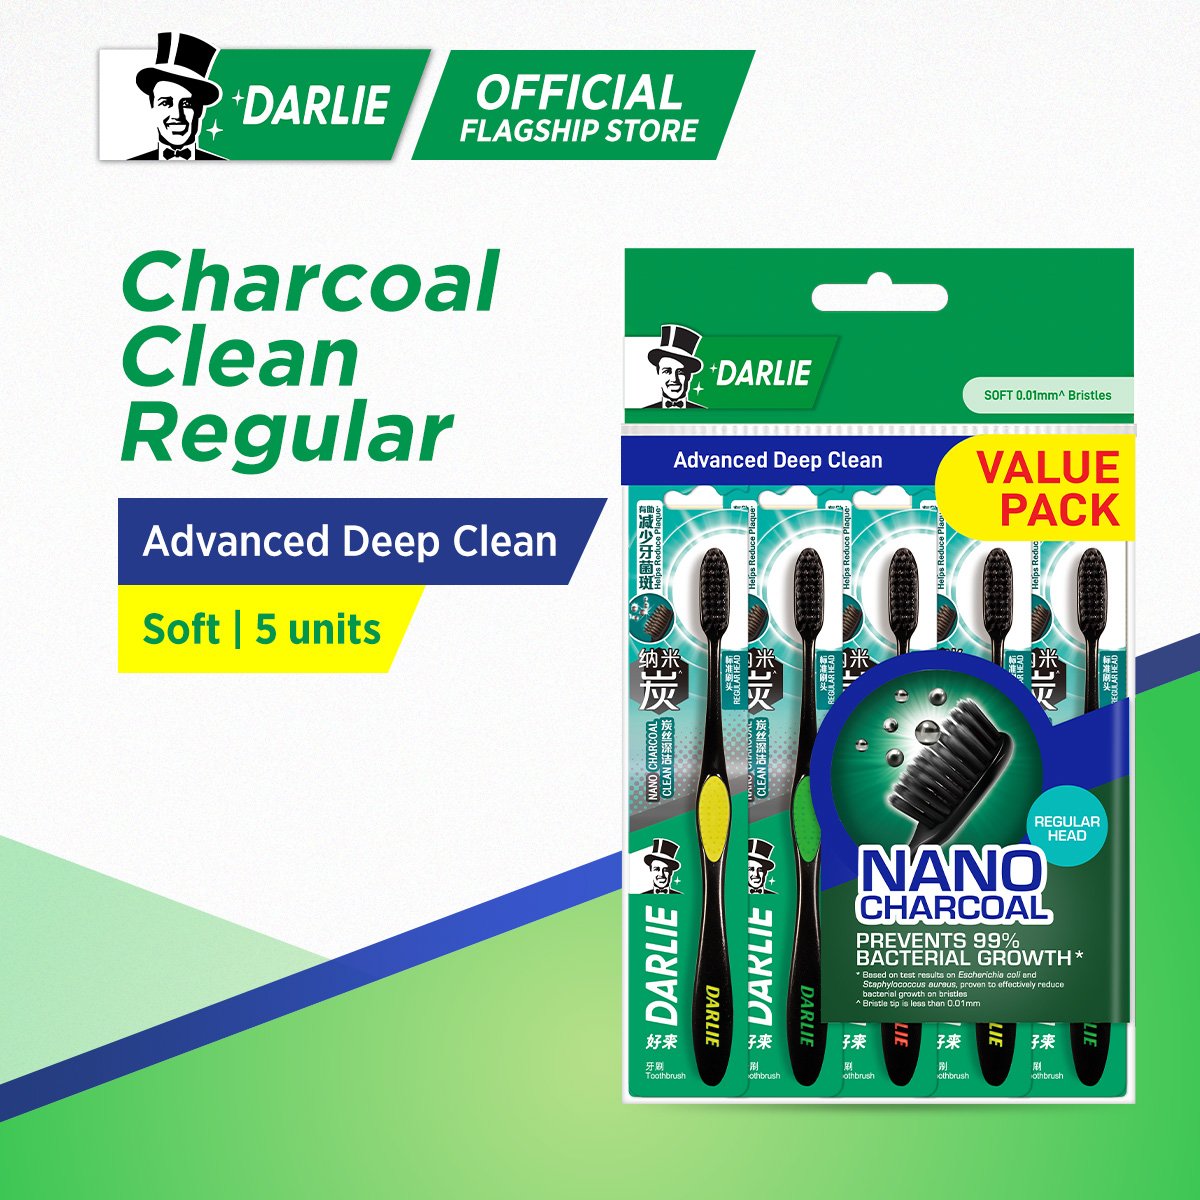 Darlie Charcoal Clean Toothbrush (Regular Head) (Soft) 5 units Value Pack